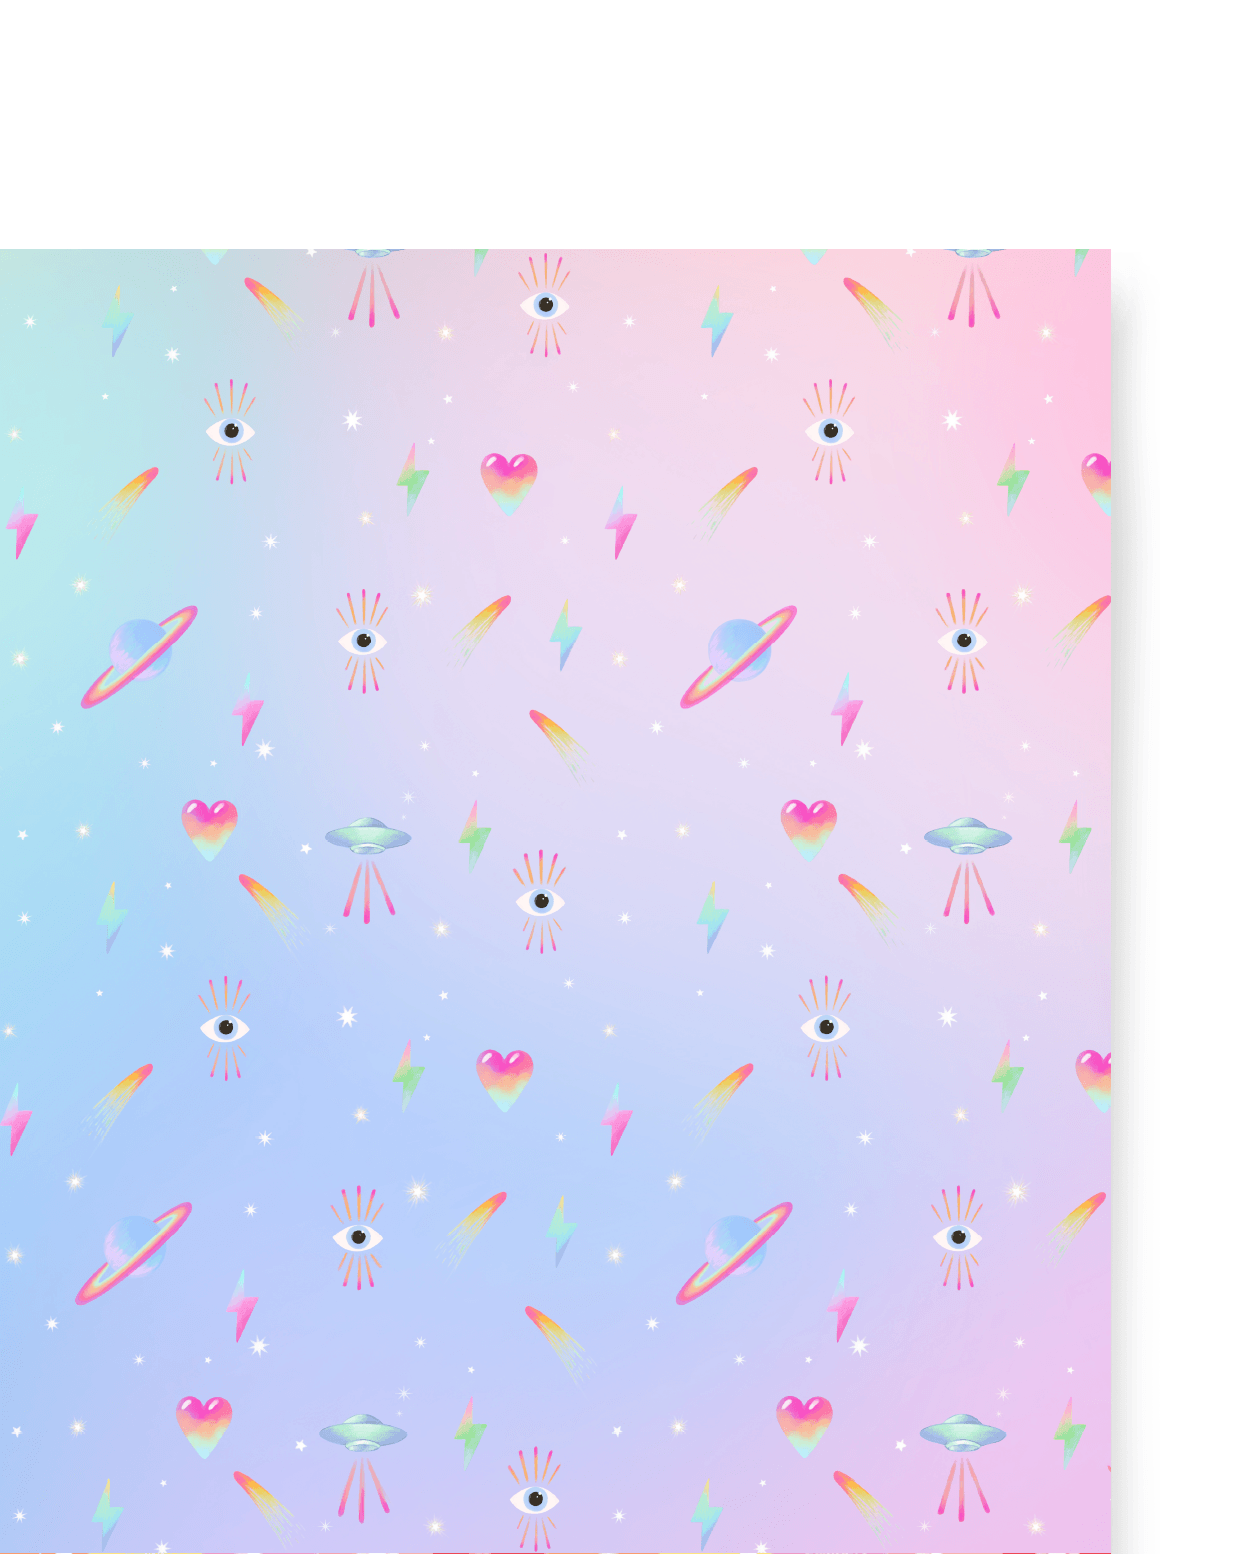 Cute Rainbow Clouds and Sunshine Wrapping Paper Sheets